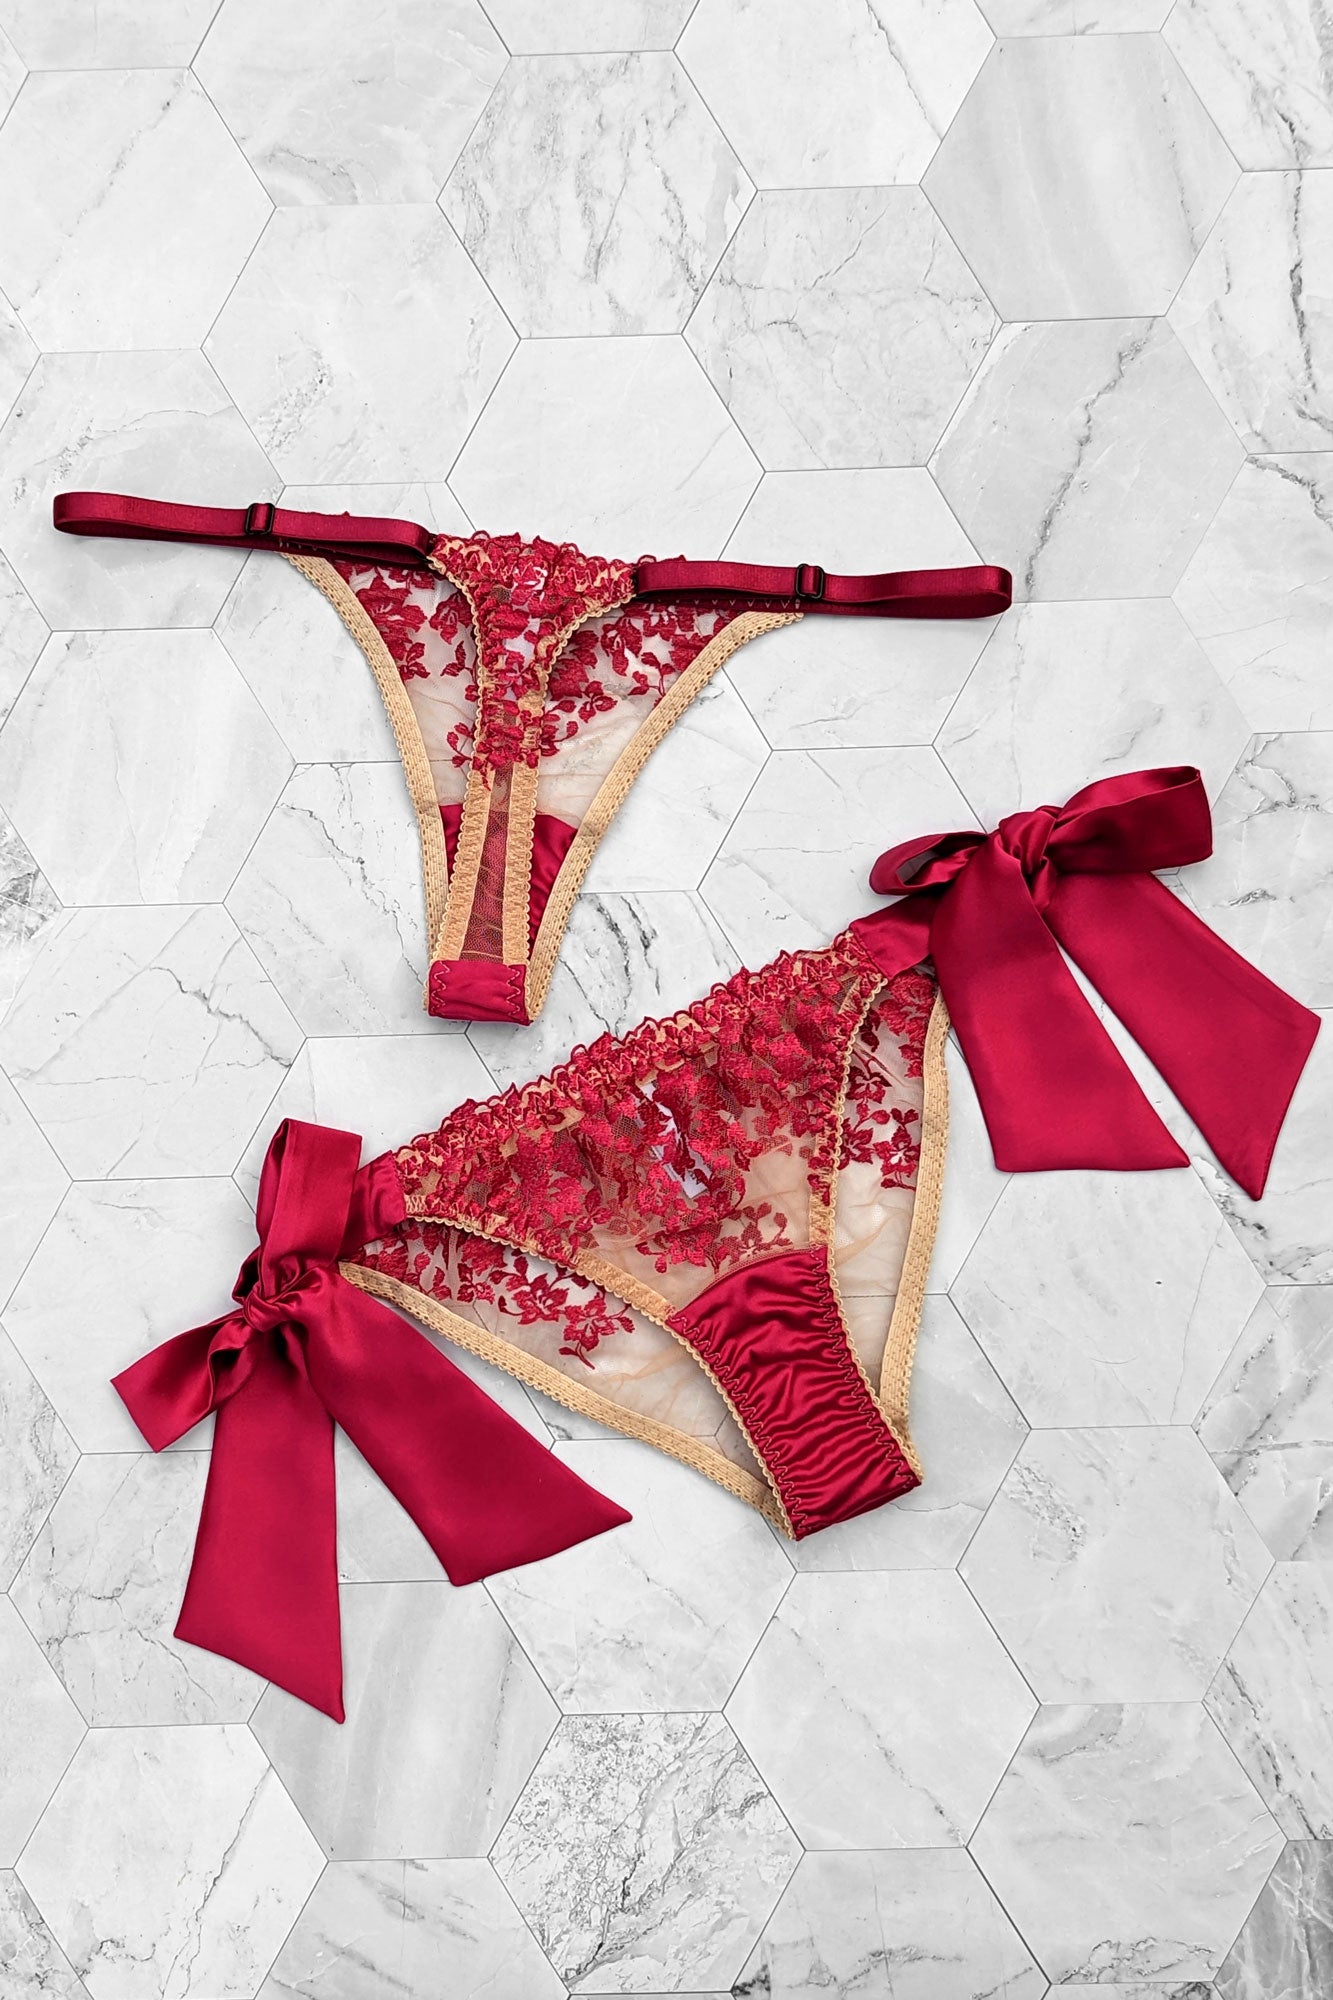 Burlesque style lingerie, handmade with red silk and sheer embroidery